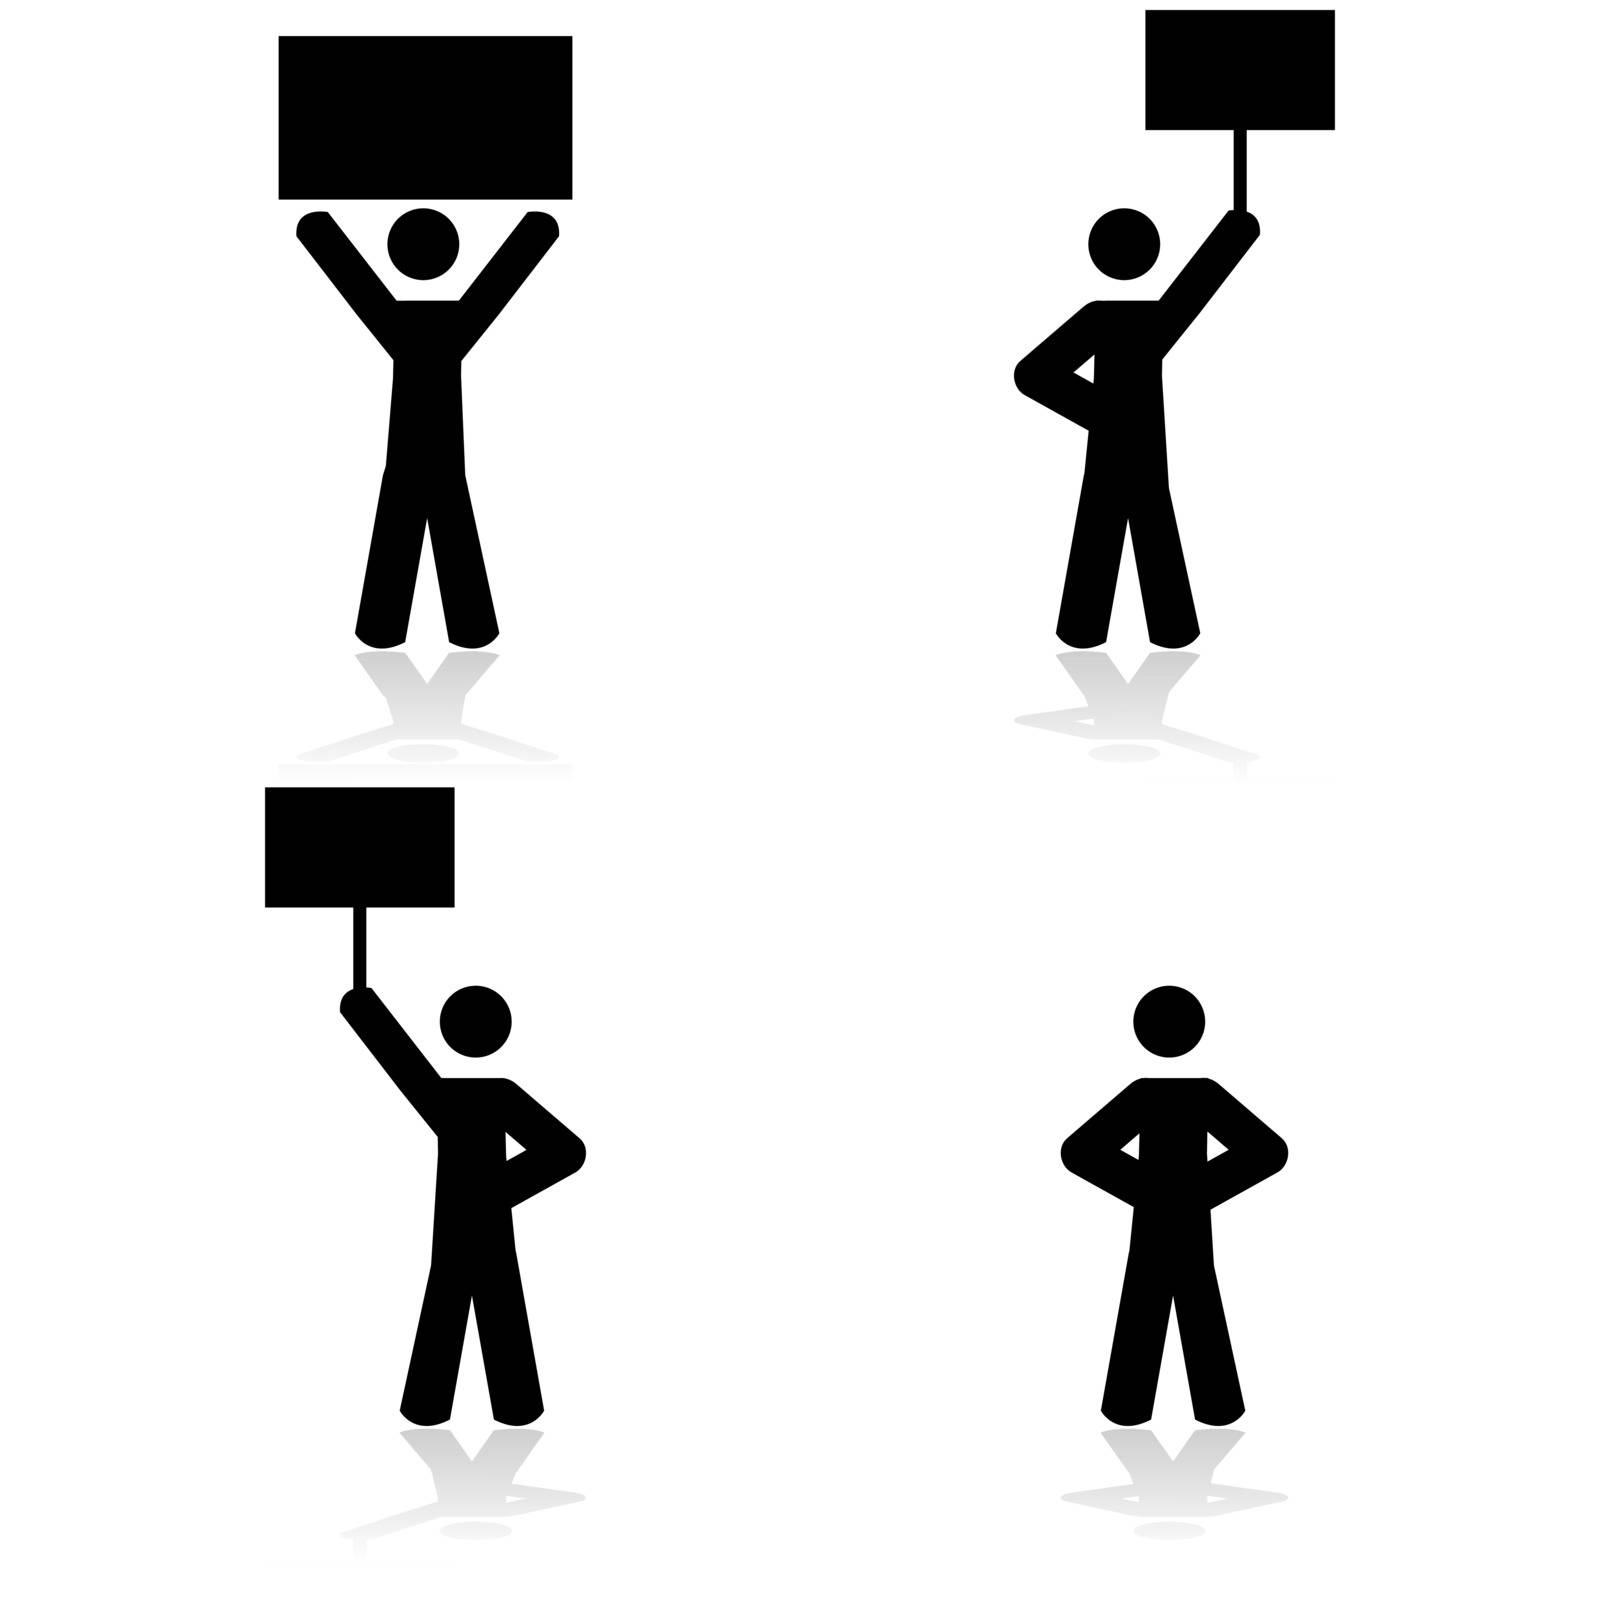 Concept illustration showing stick figures in protests